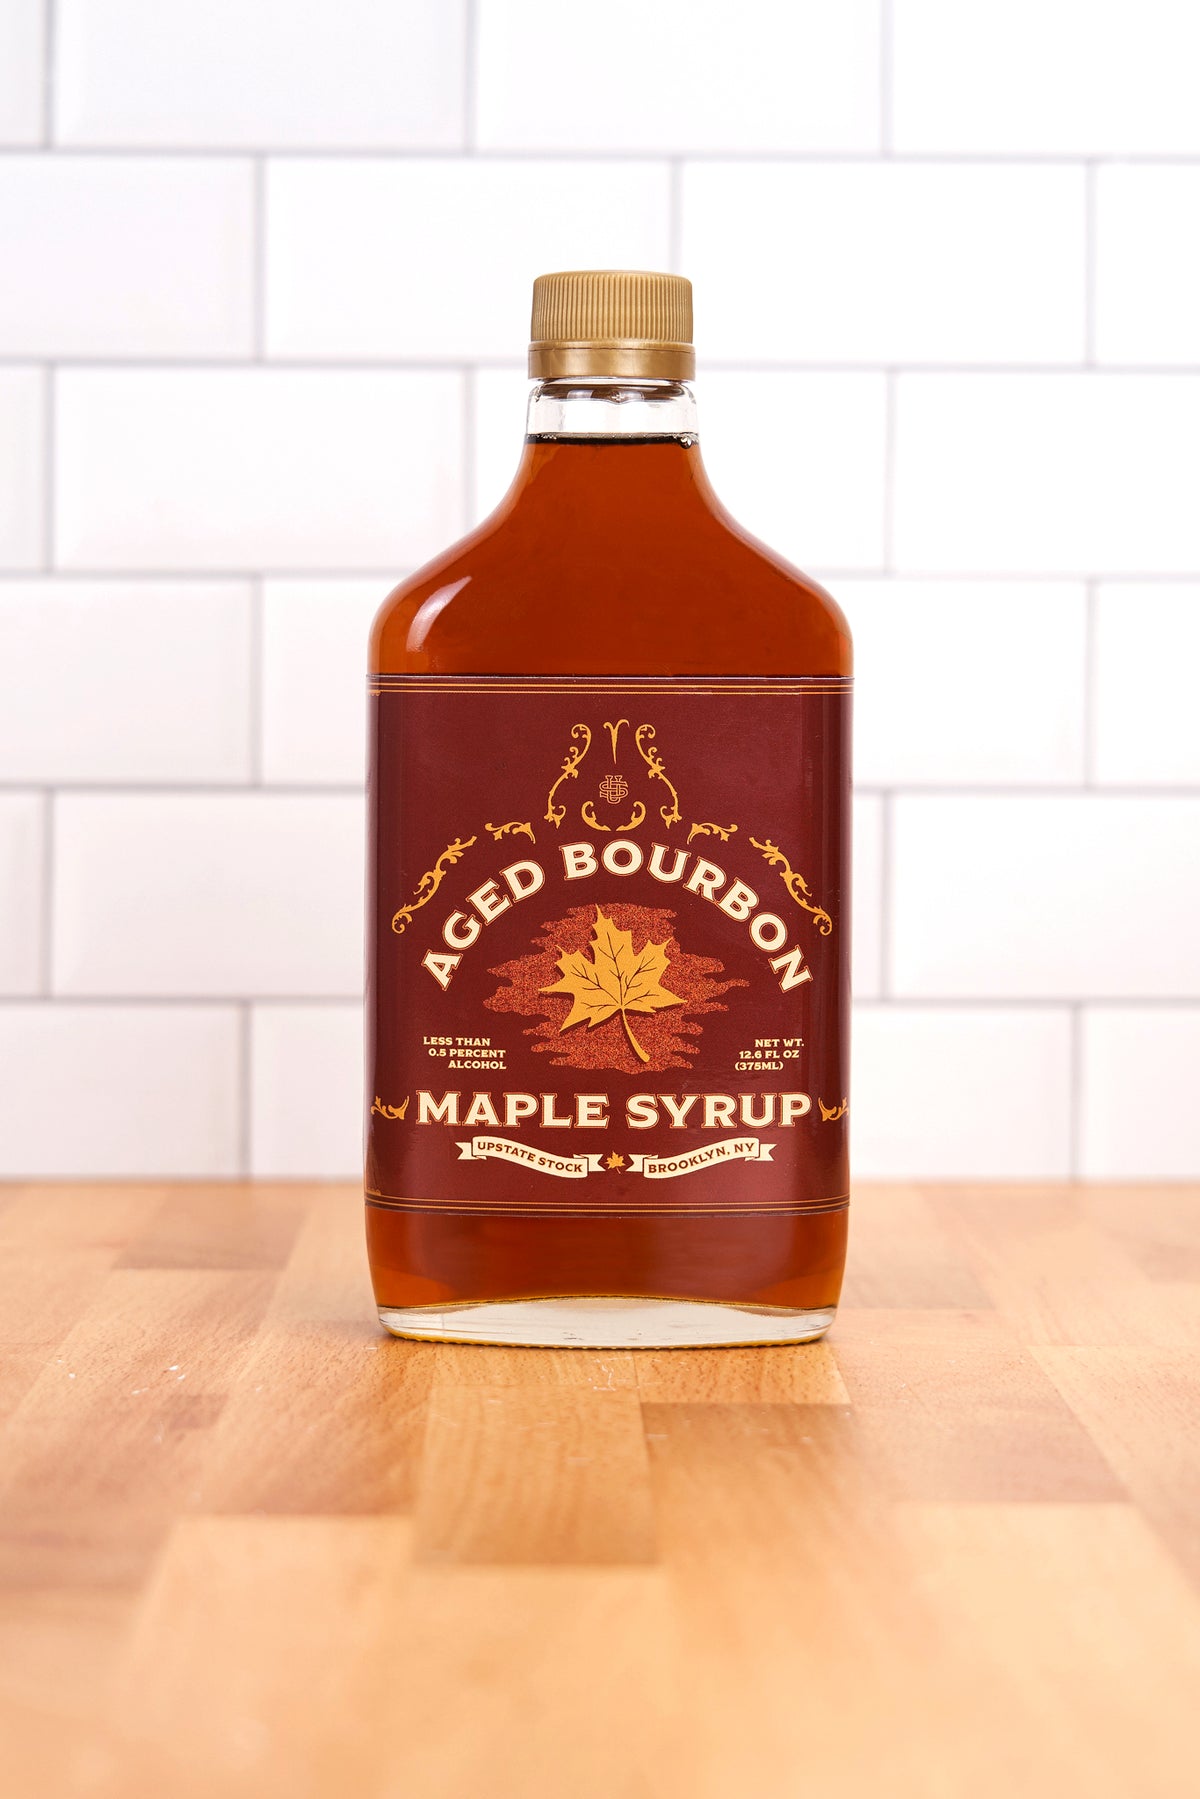 Upstate Stock Maple Collection - BOURBON MAPLE SYRUP